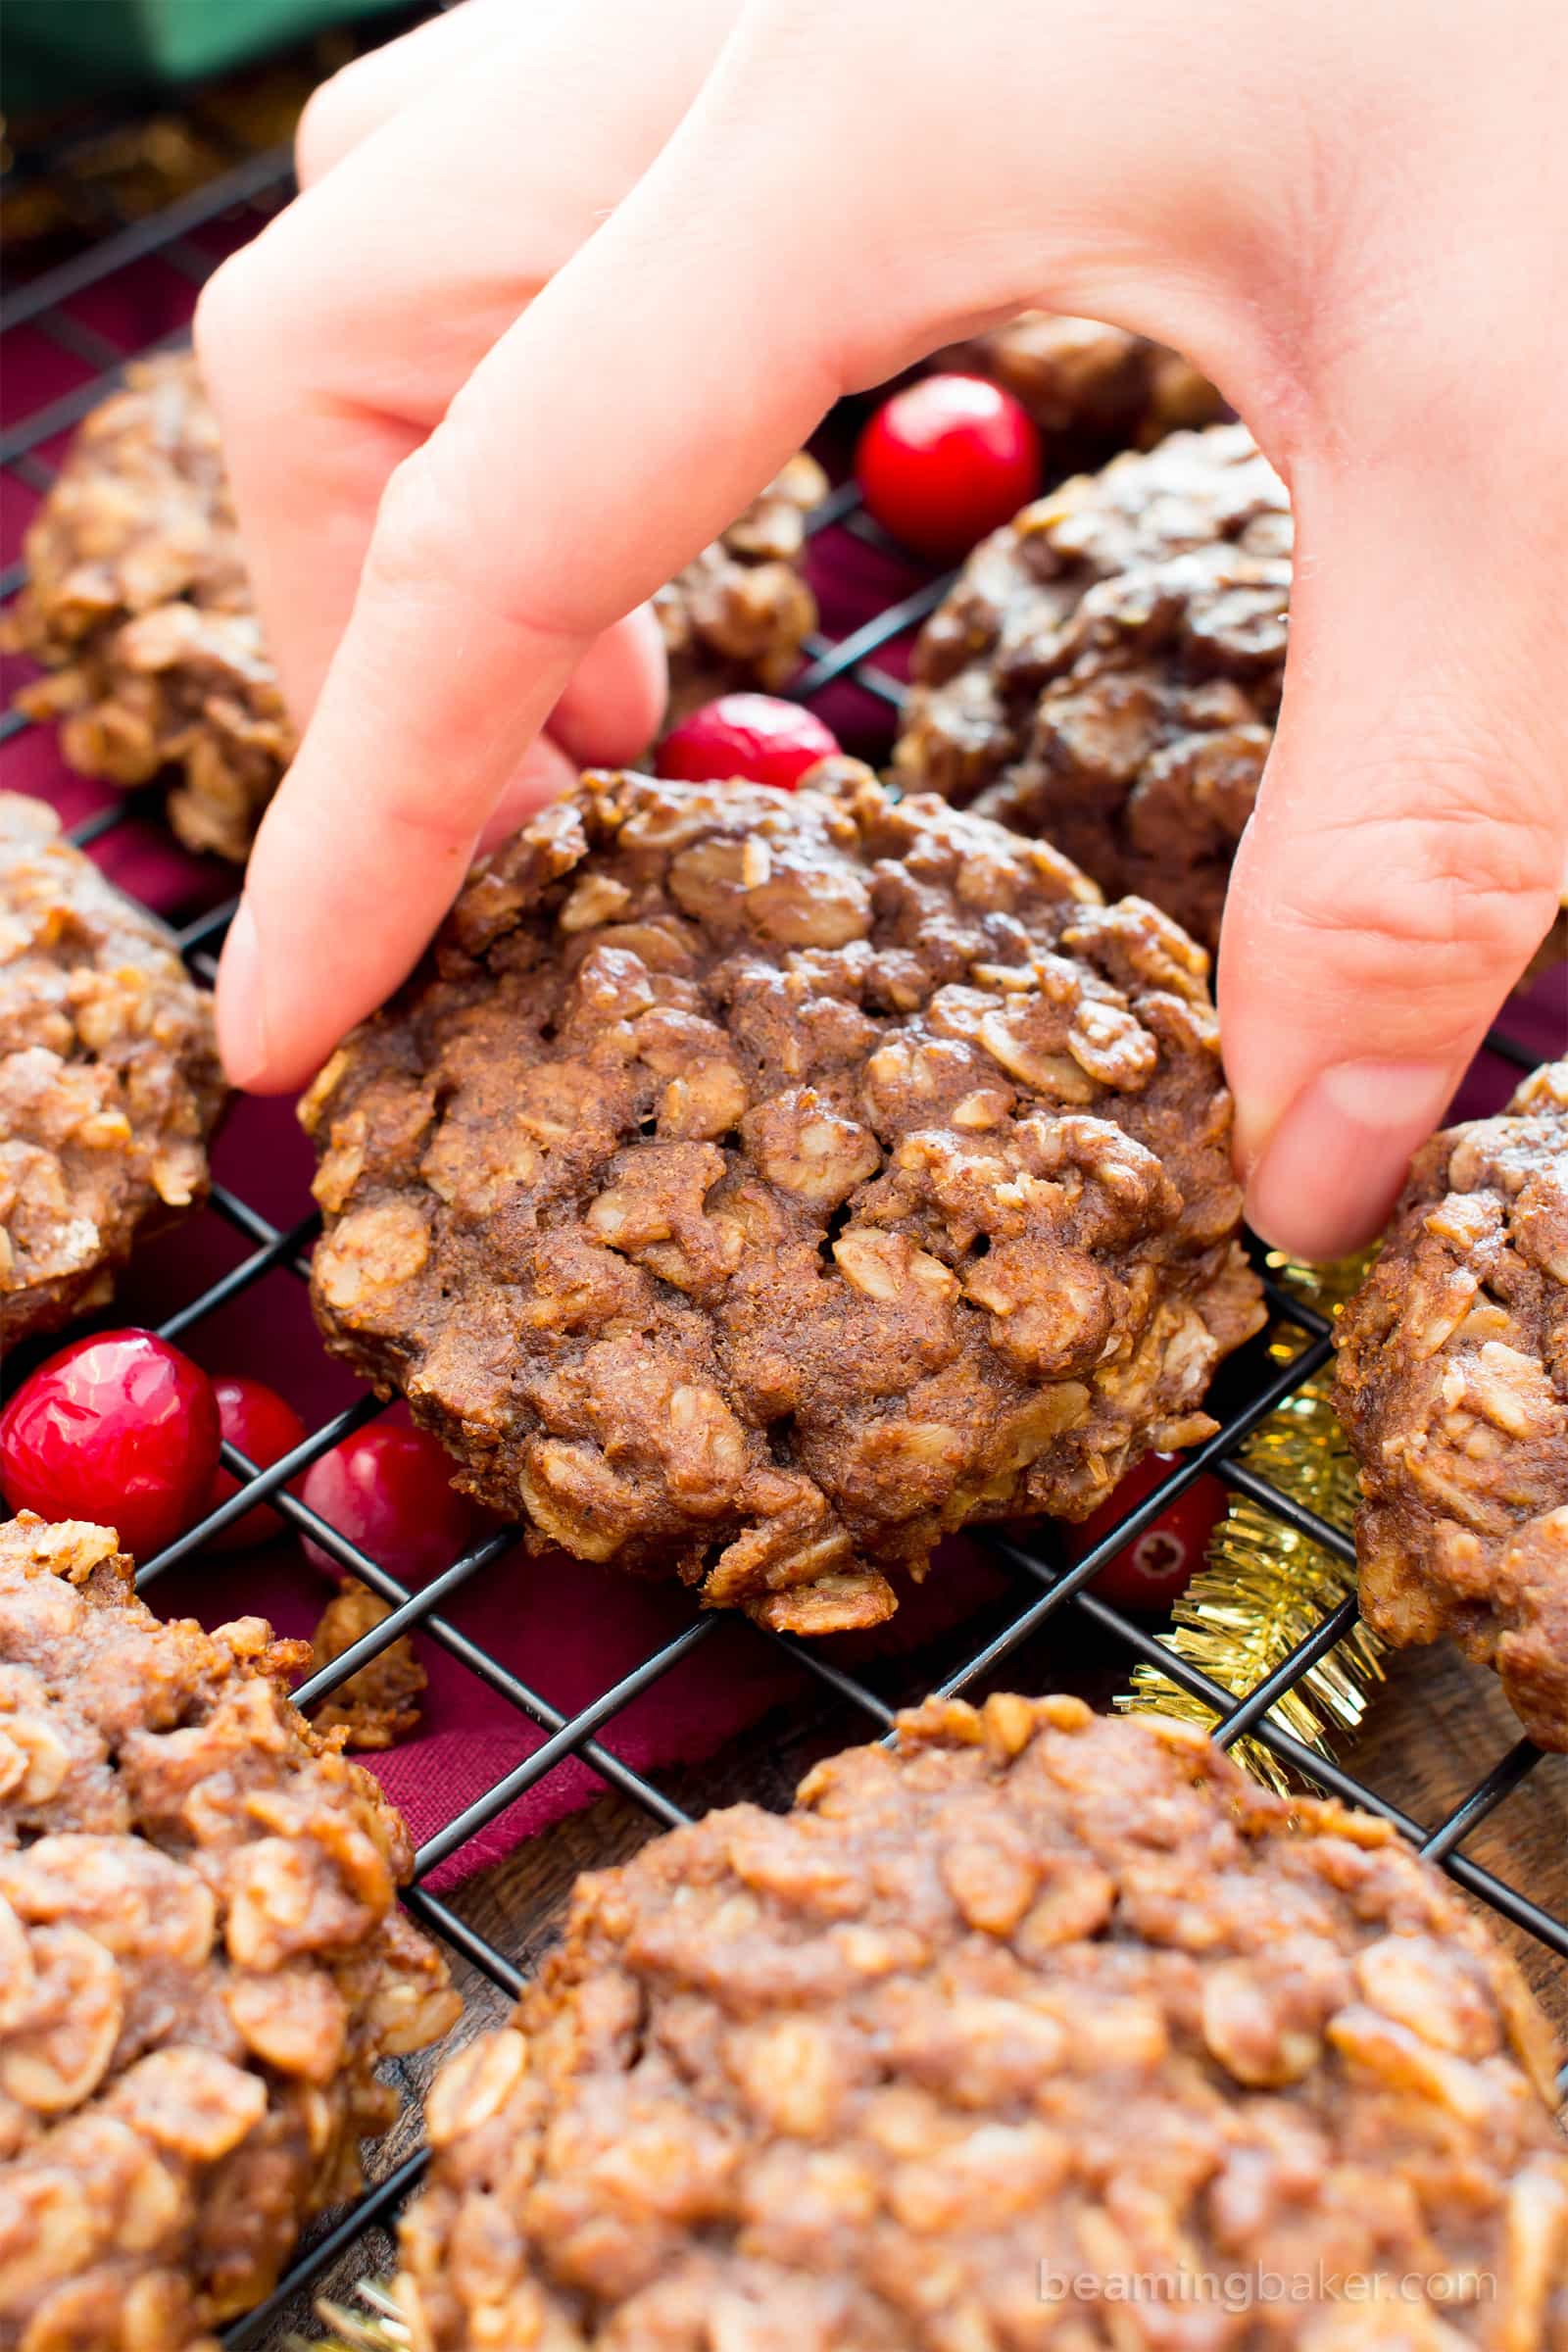 Gluten Free Gingerbread Oatmeal Breakfast Cookies (V, GF): an easy recipe for lightly sweet, soft and chewy ginger oatmeal cookies bursting with your favorite warm holiday spices! #Vegan #GlutenFree #Christmas #DairyFree #Holiday #Healthy | Recipe on BeamingBaker.com